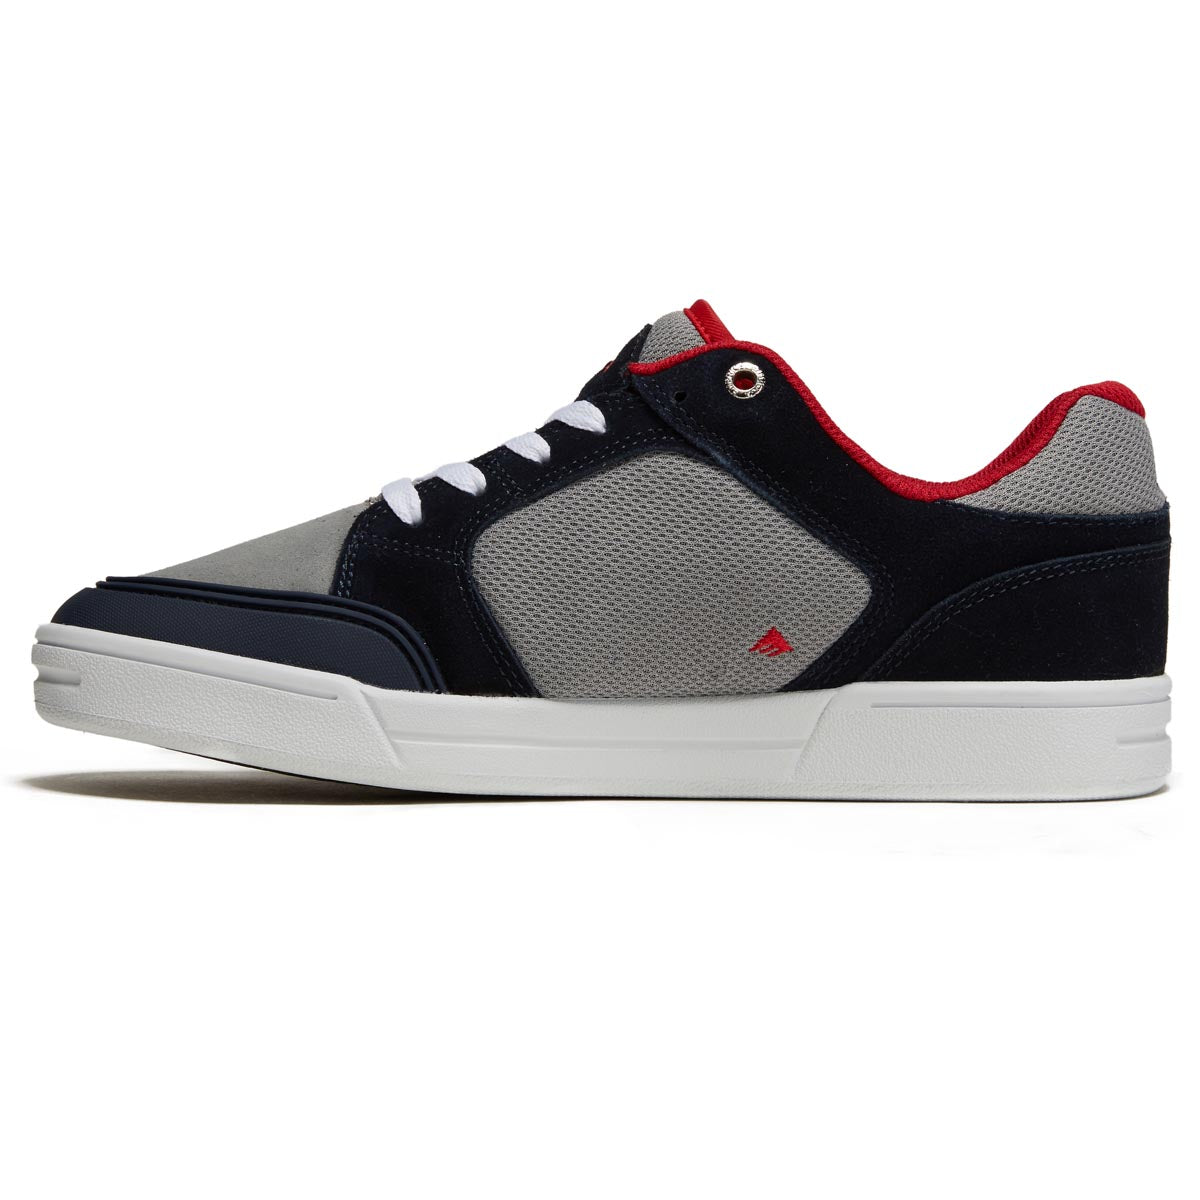 Emerica Heritic Shoes - Navy/Grey/Red image 2